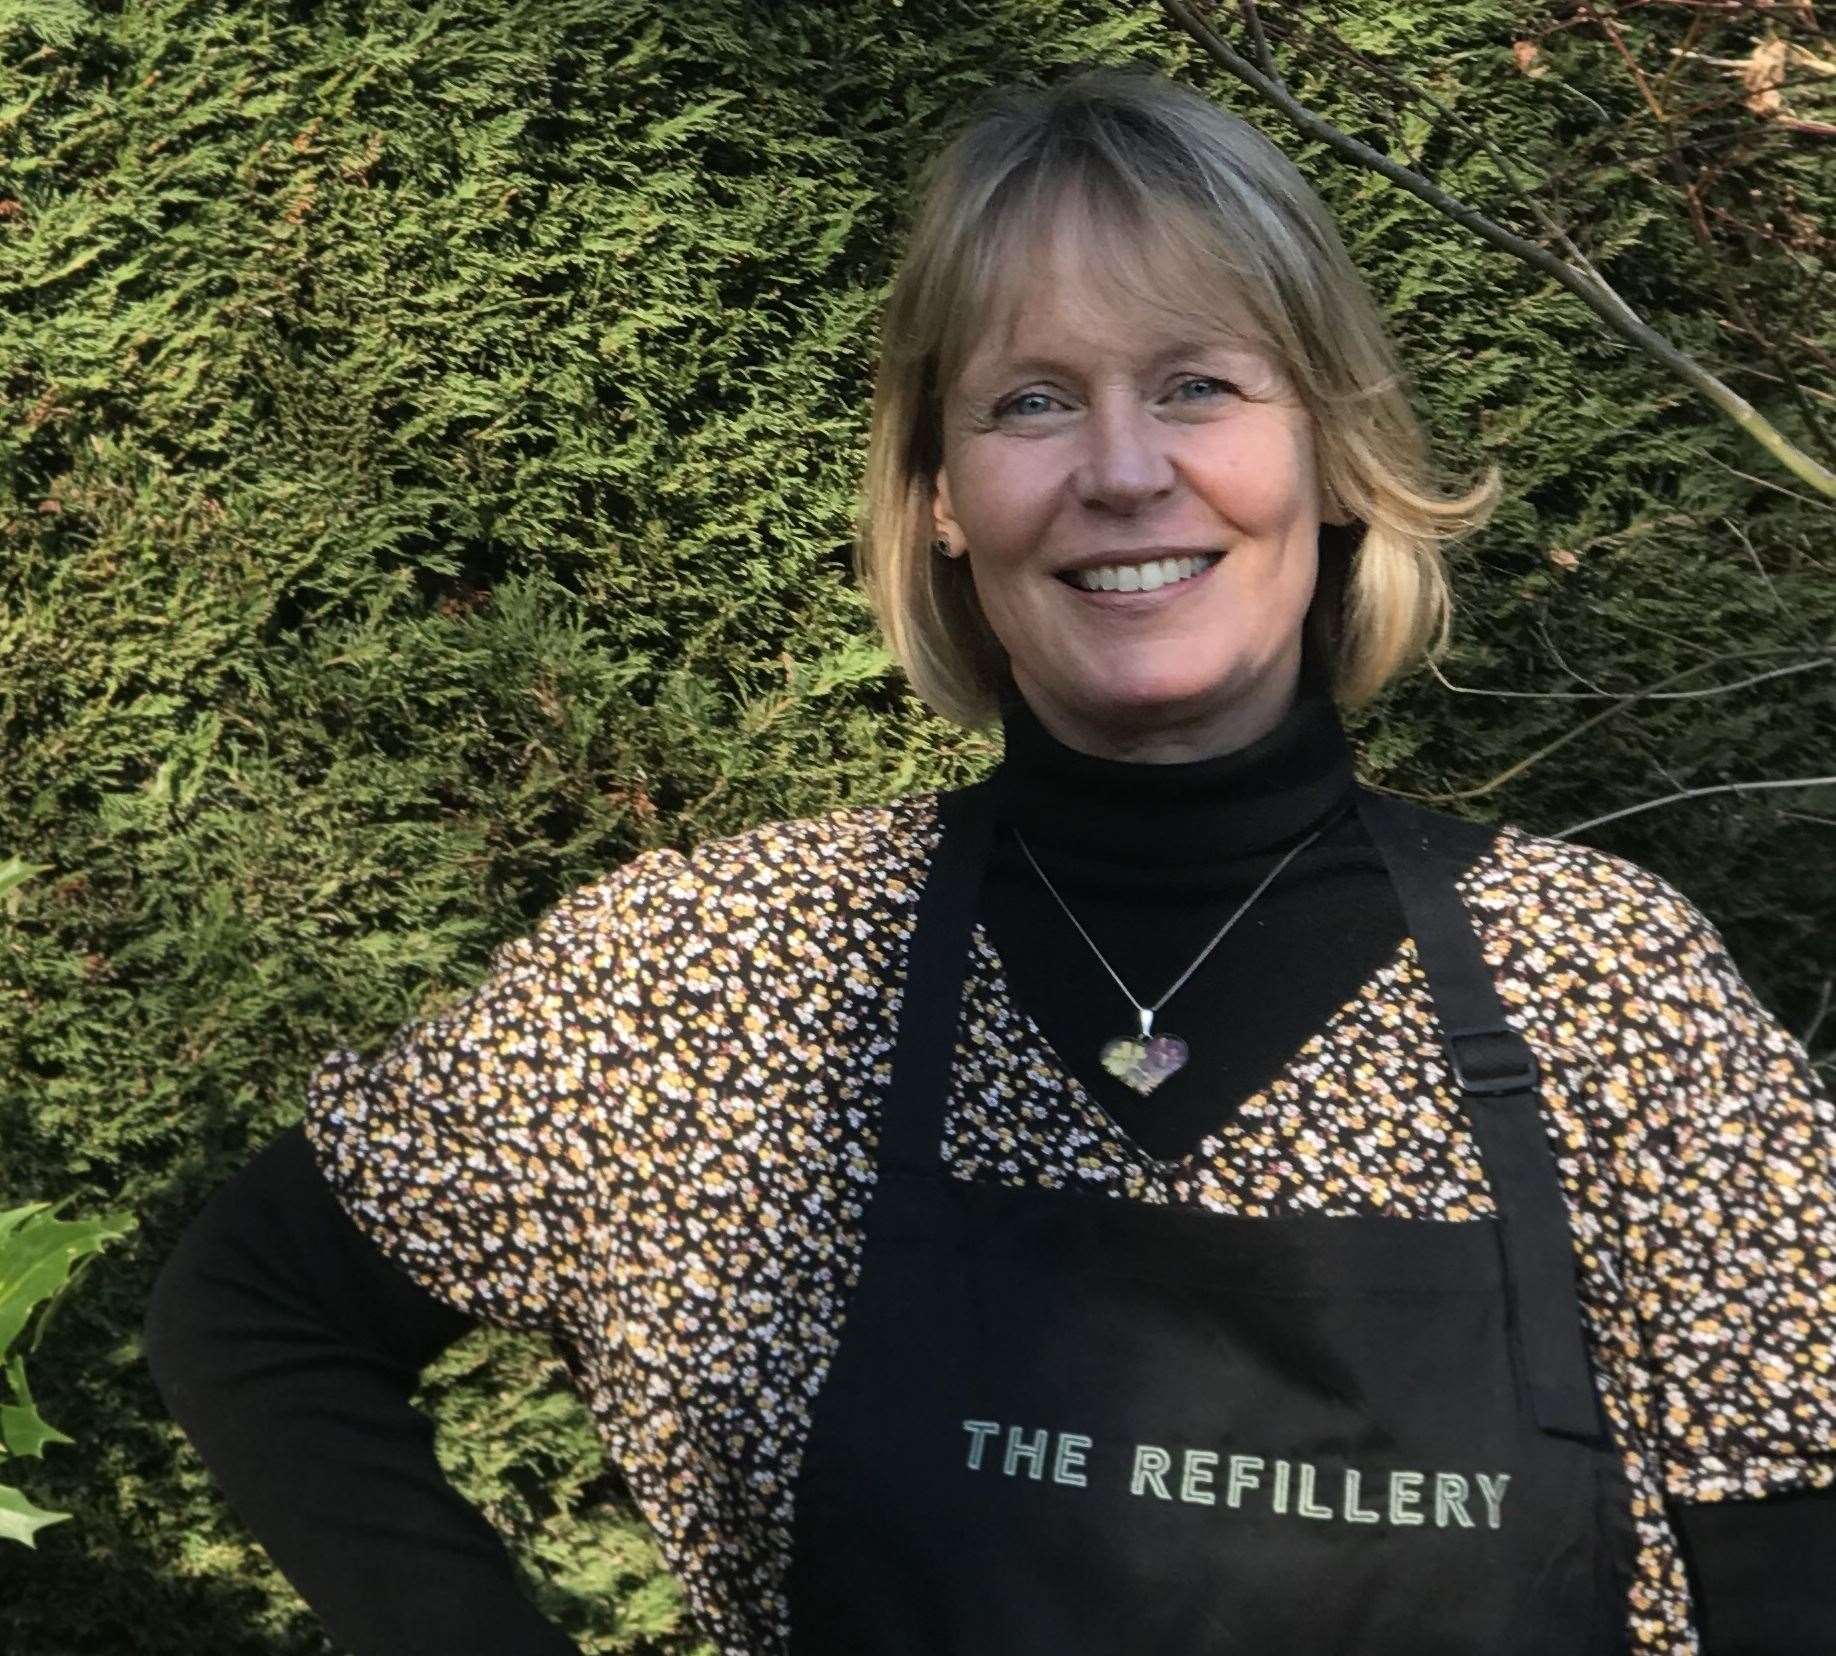 Catherine Parker will run The Refillery in Sun Street, Canterbury